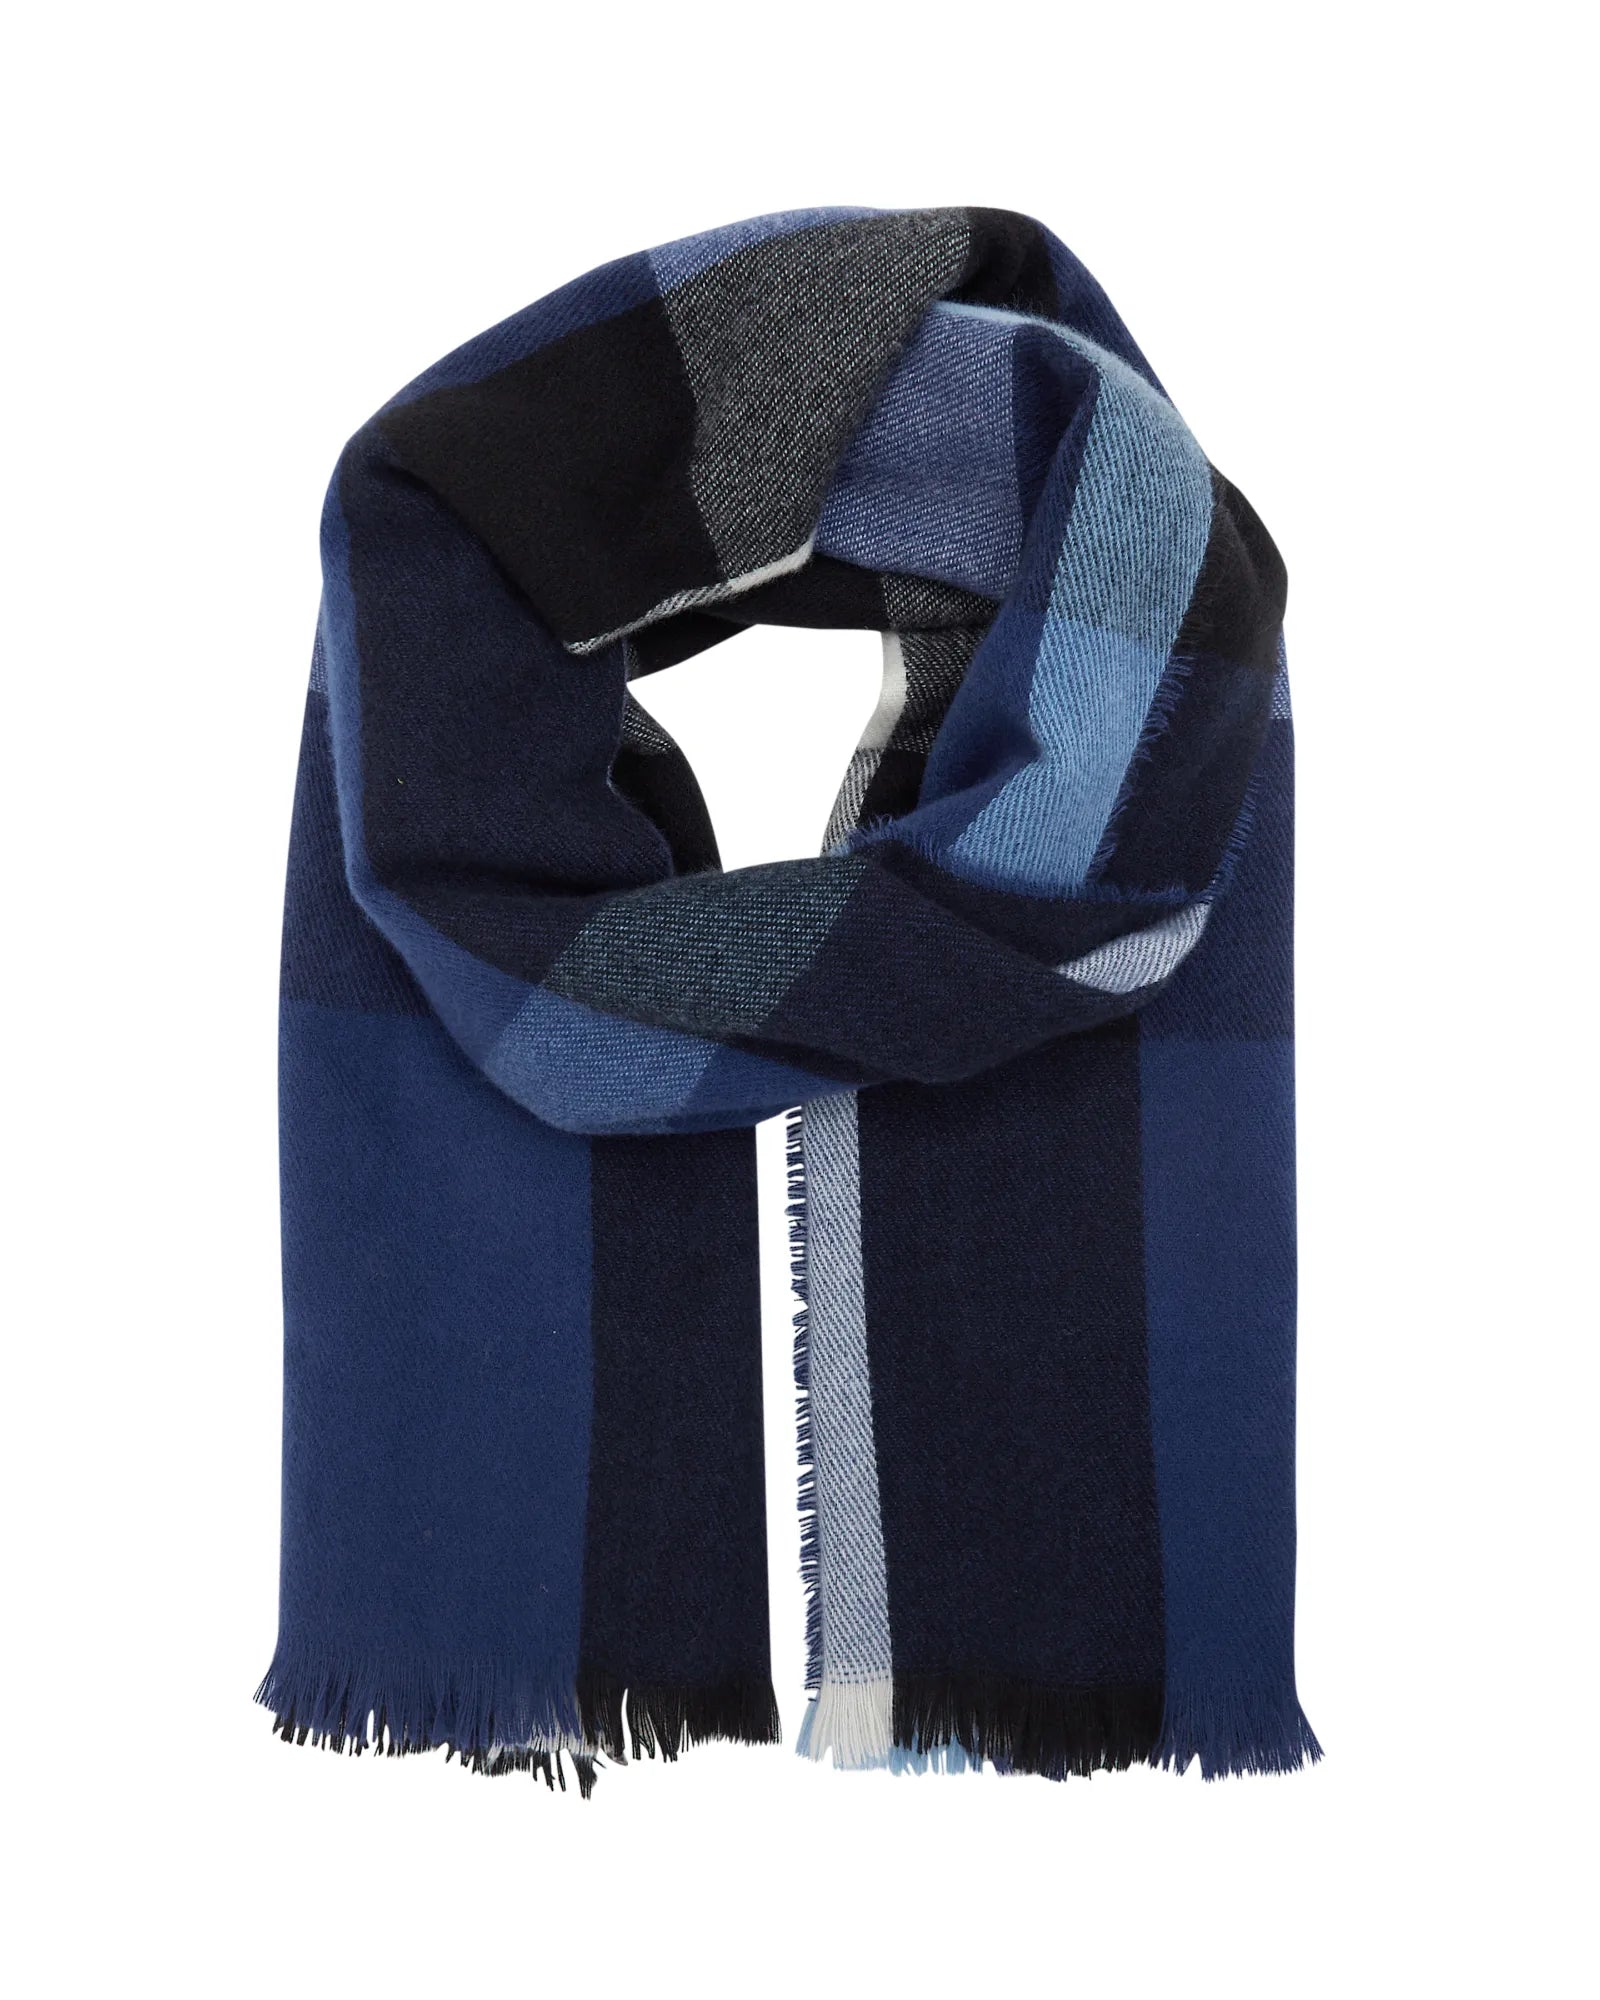 Berry Scarf - Bellwether Blue Mix